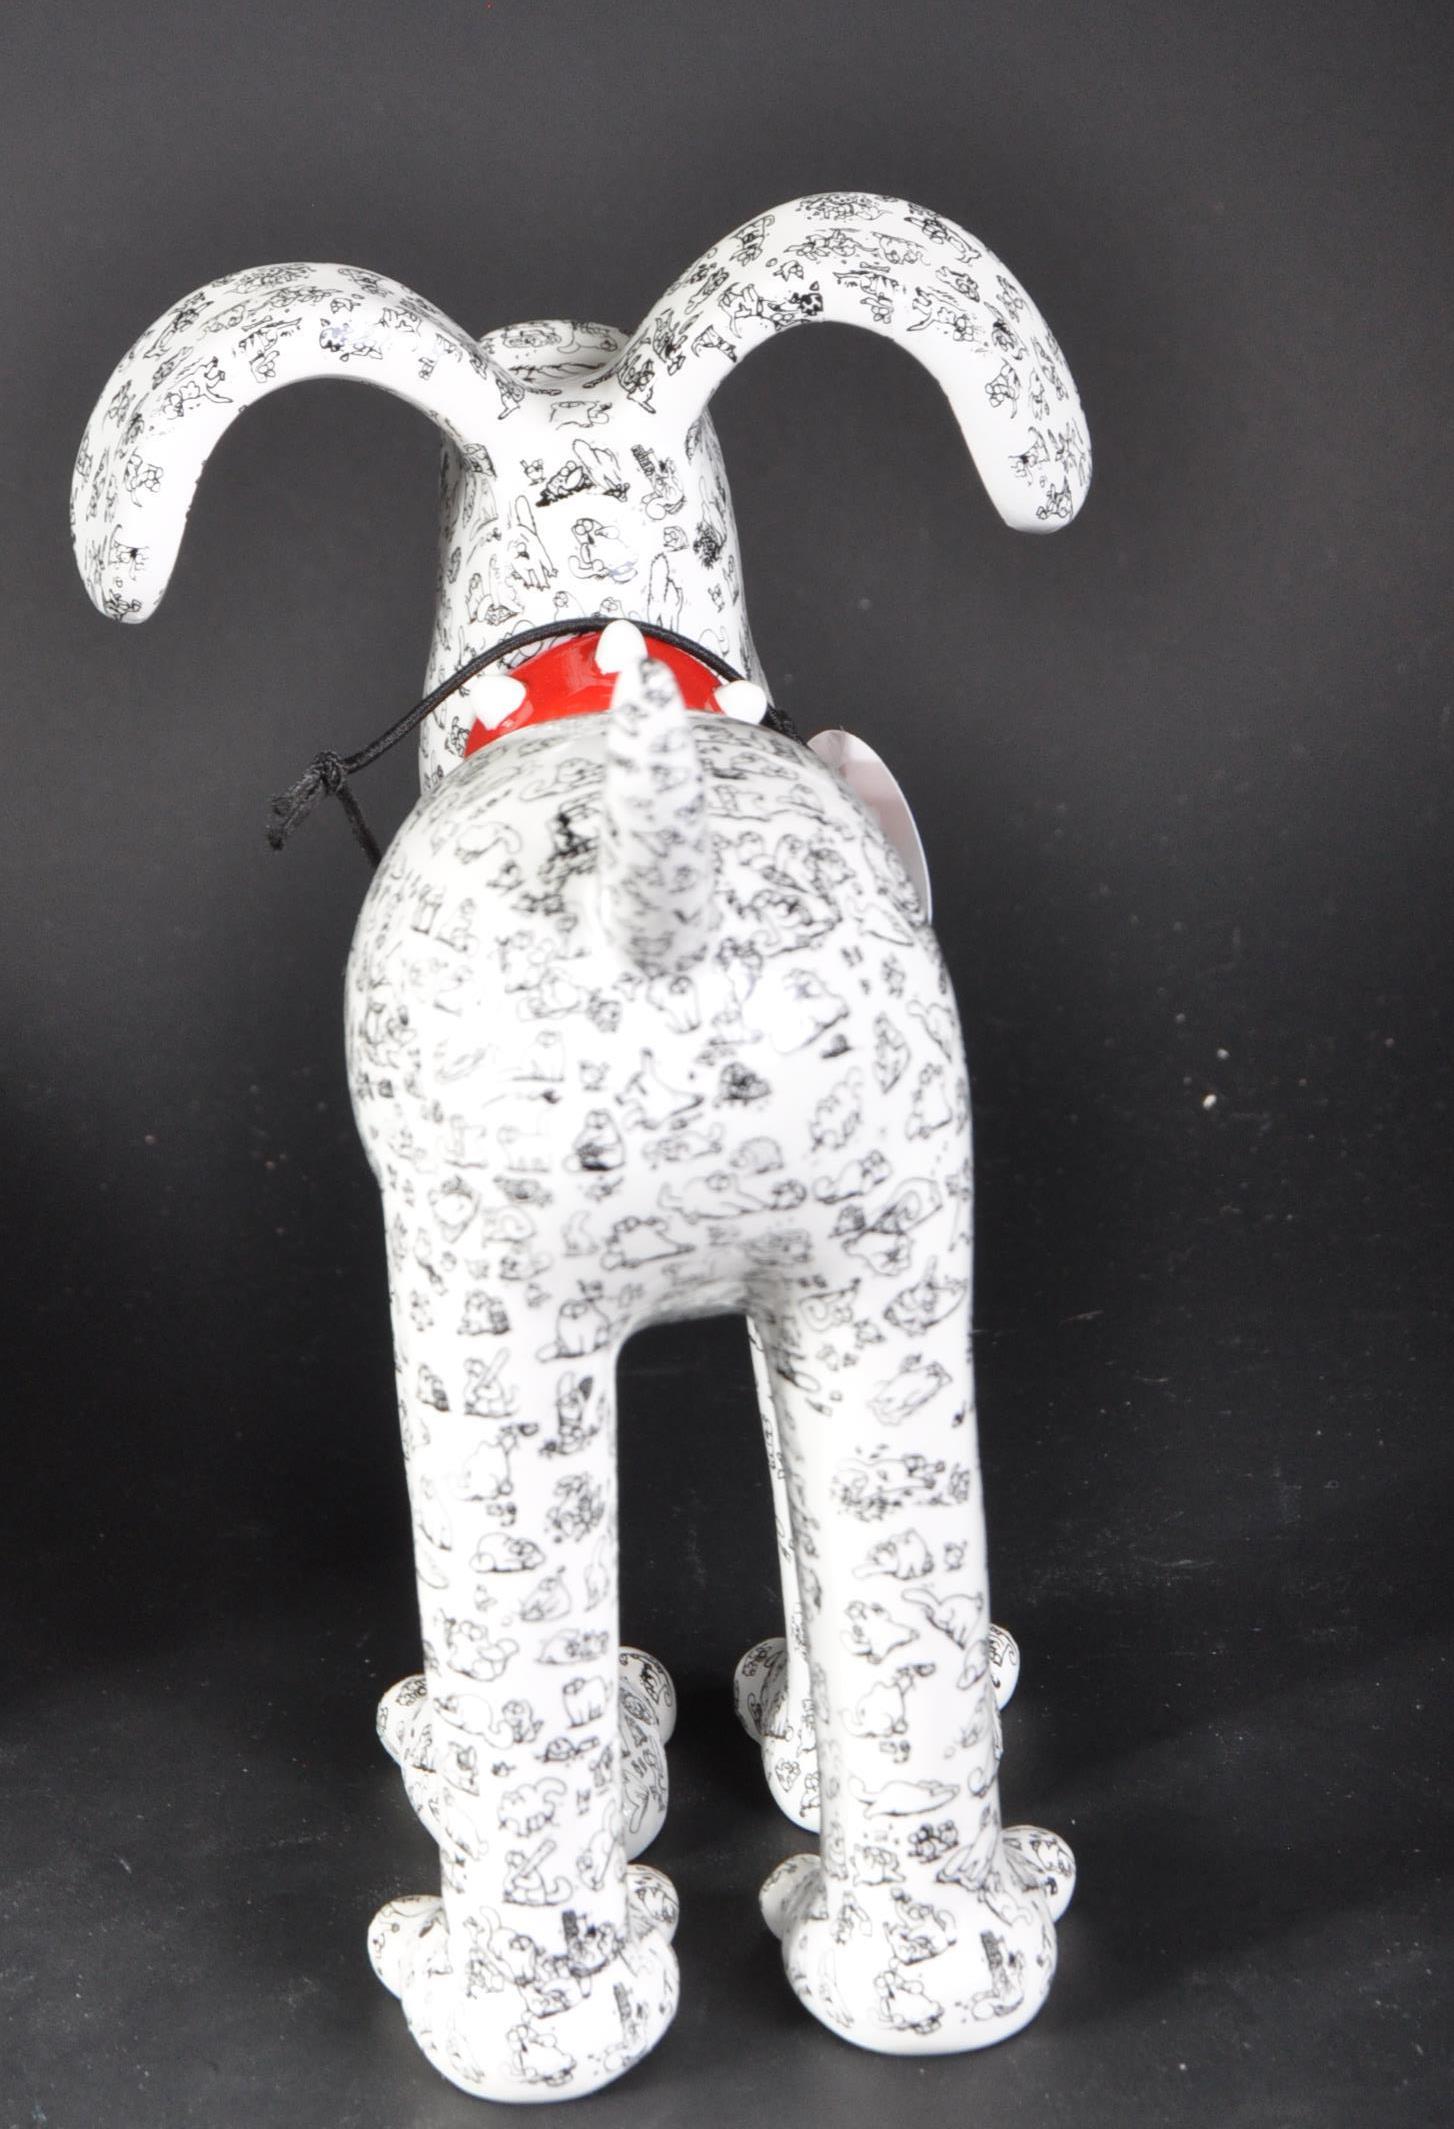 WALLACE & GROMIT - GROMIT UNLEASHED COLLECTABLE FIGURINE - Image 4 of 6